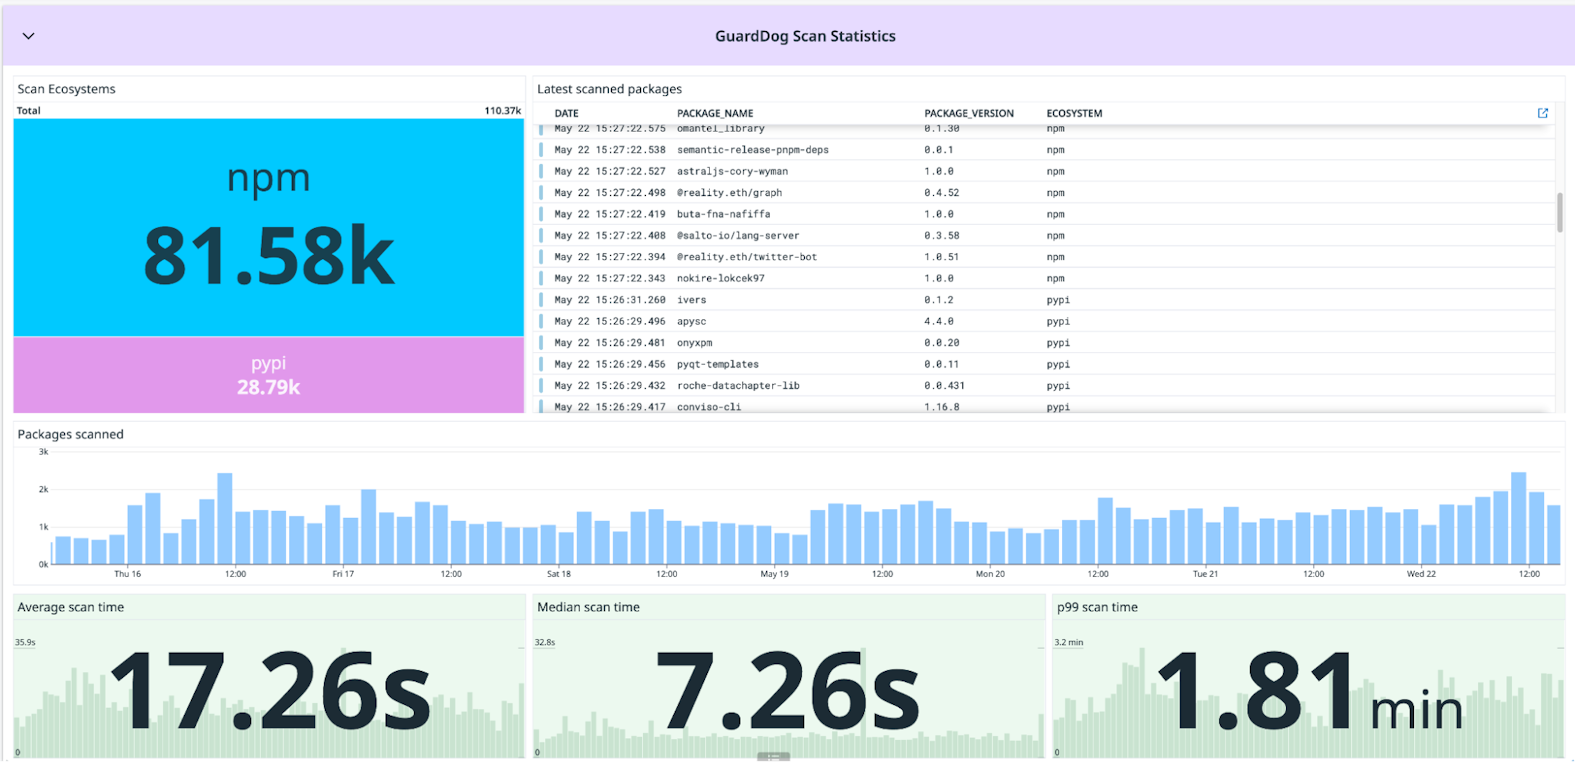 Our operational Datadog dashboard showing package scan statistics in the last week